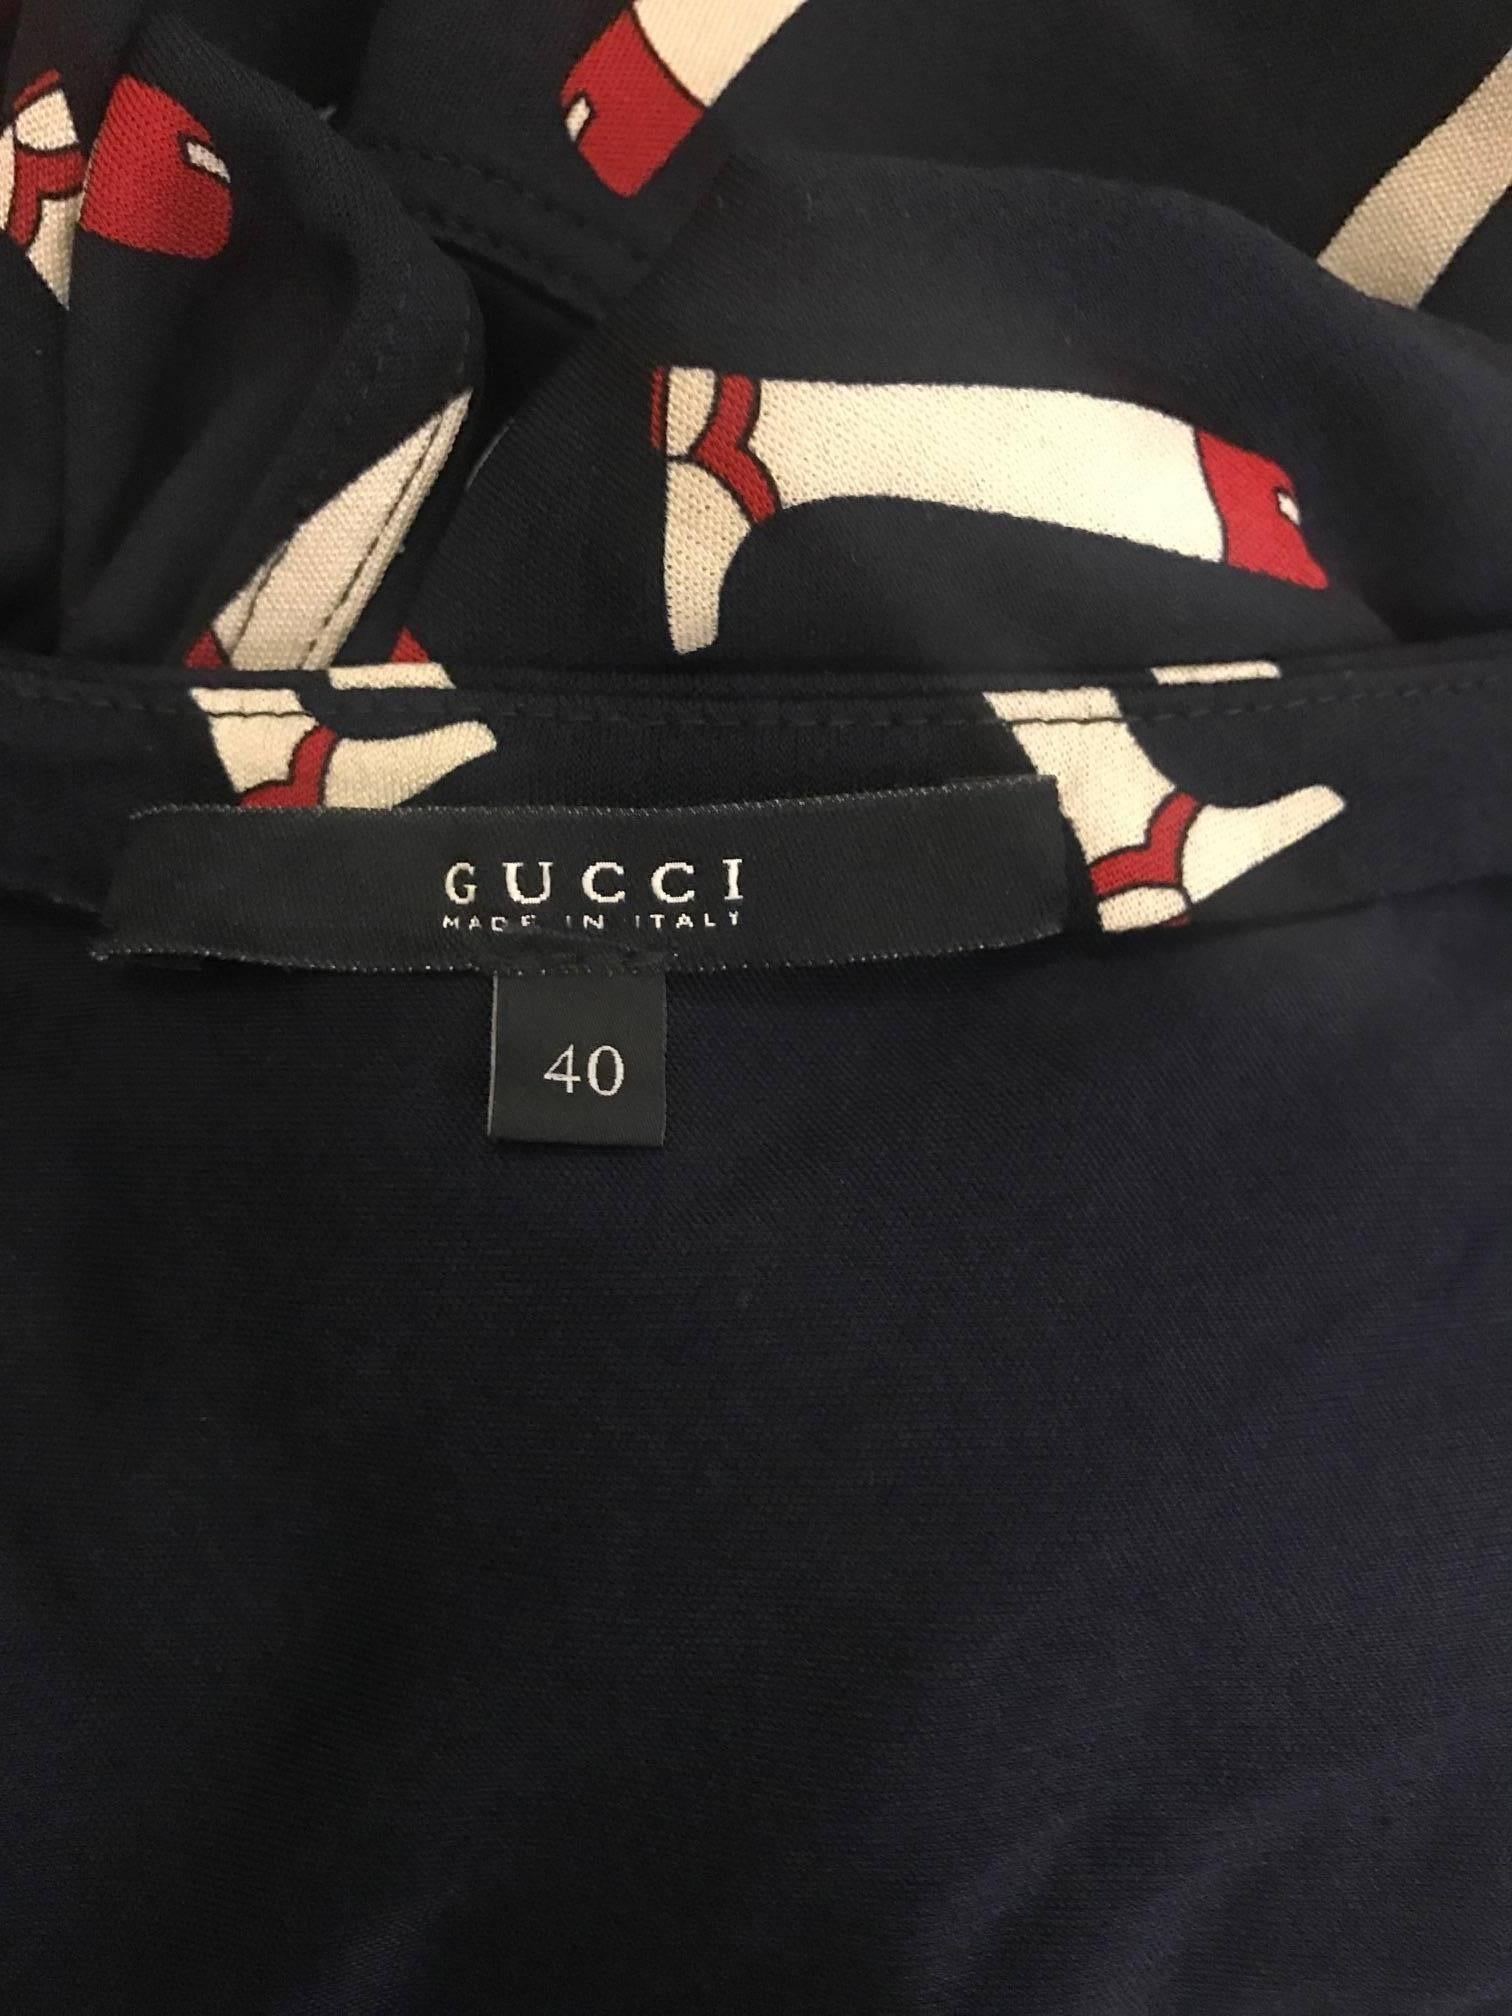 Women's Gucci Navy Equestrian Boot Print Silk Wrap Dress with Silver Horsebit Charms